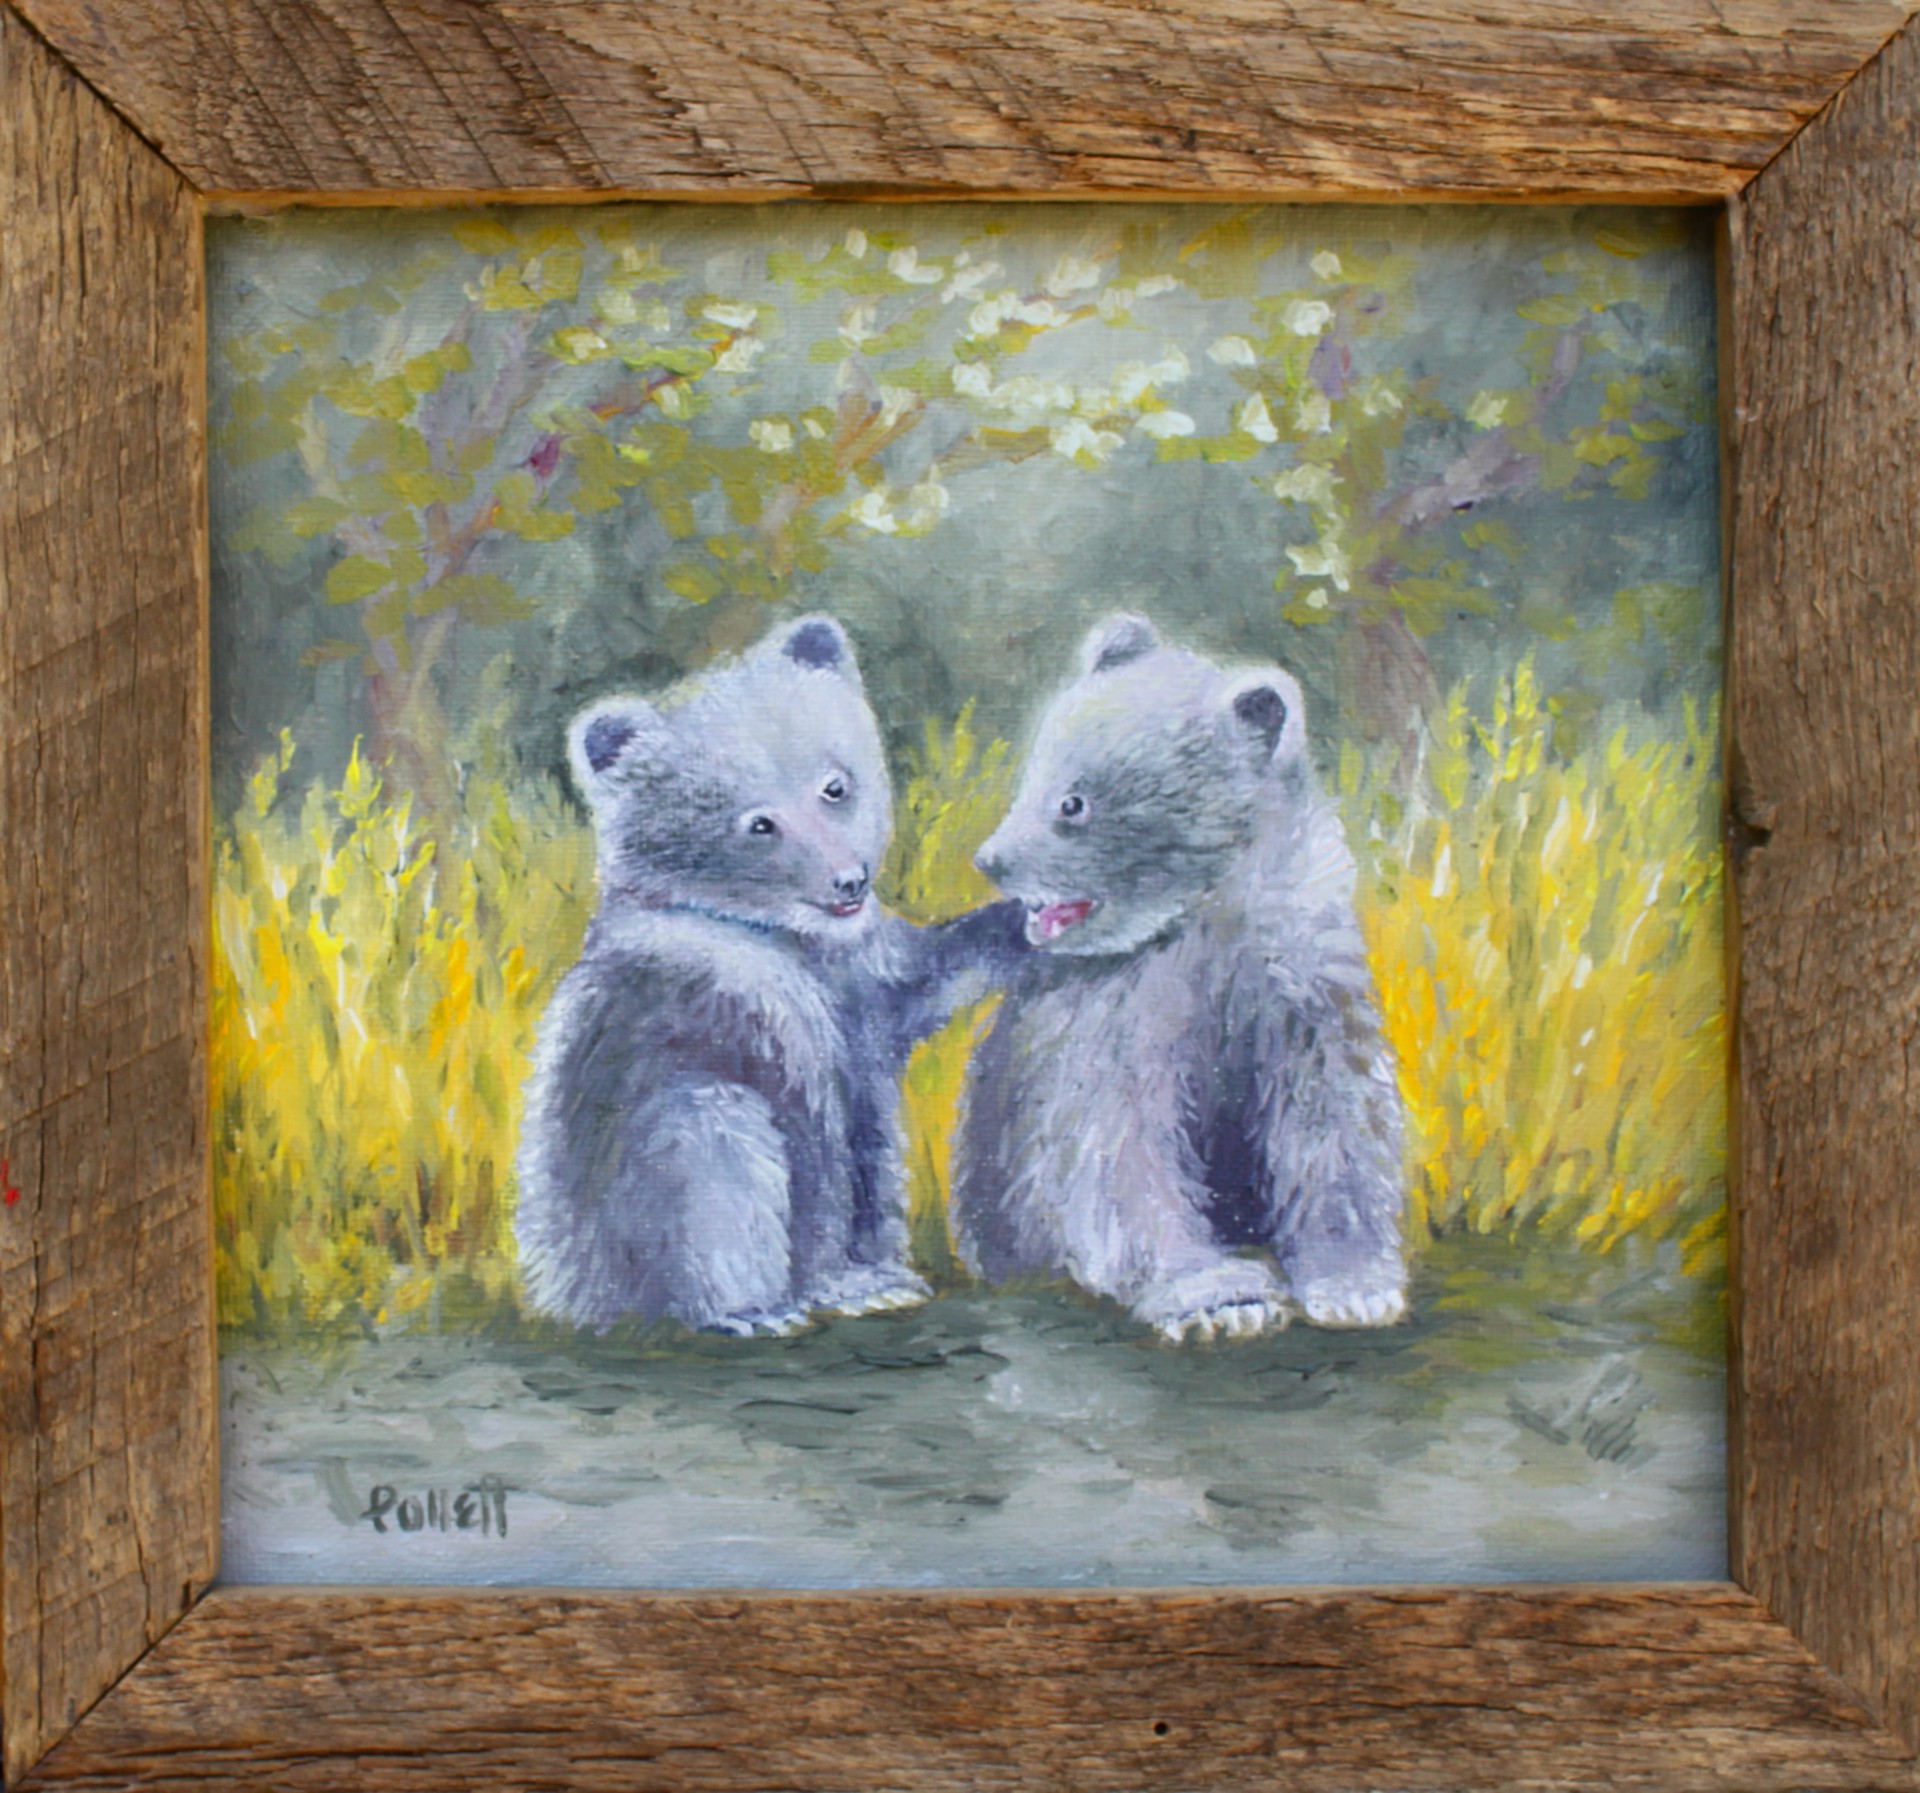 Sibling Cubs by Cynthia Jewell Pollett